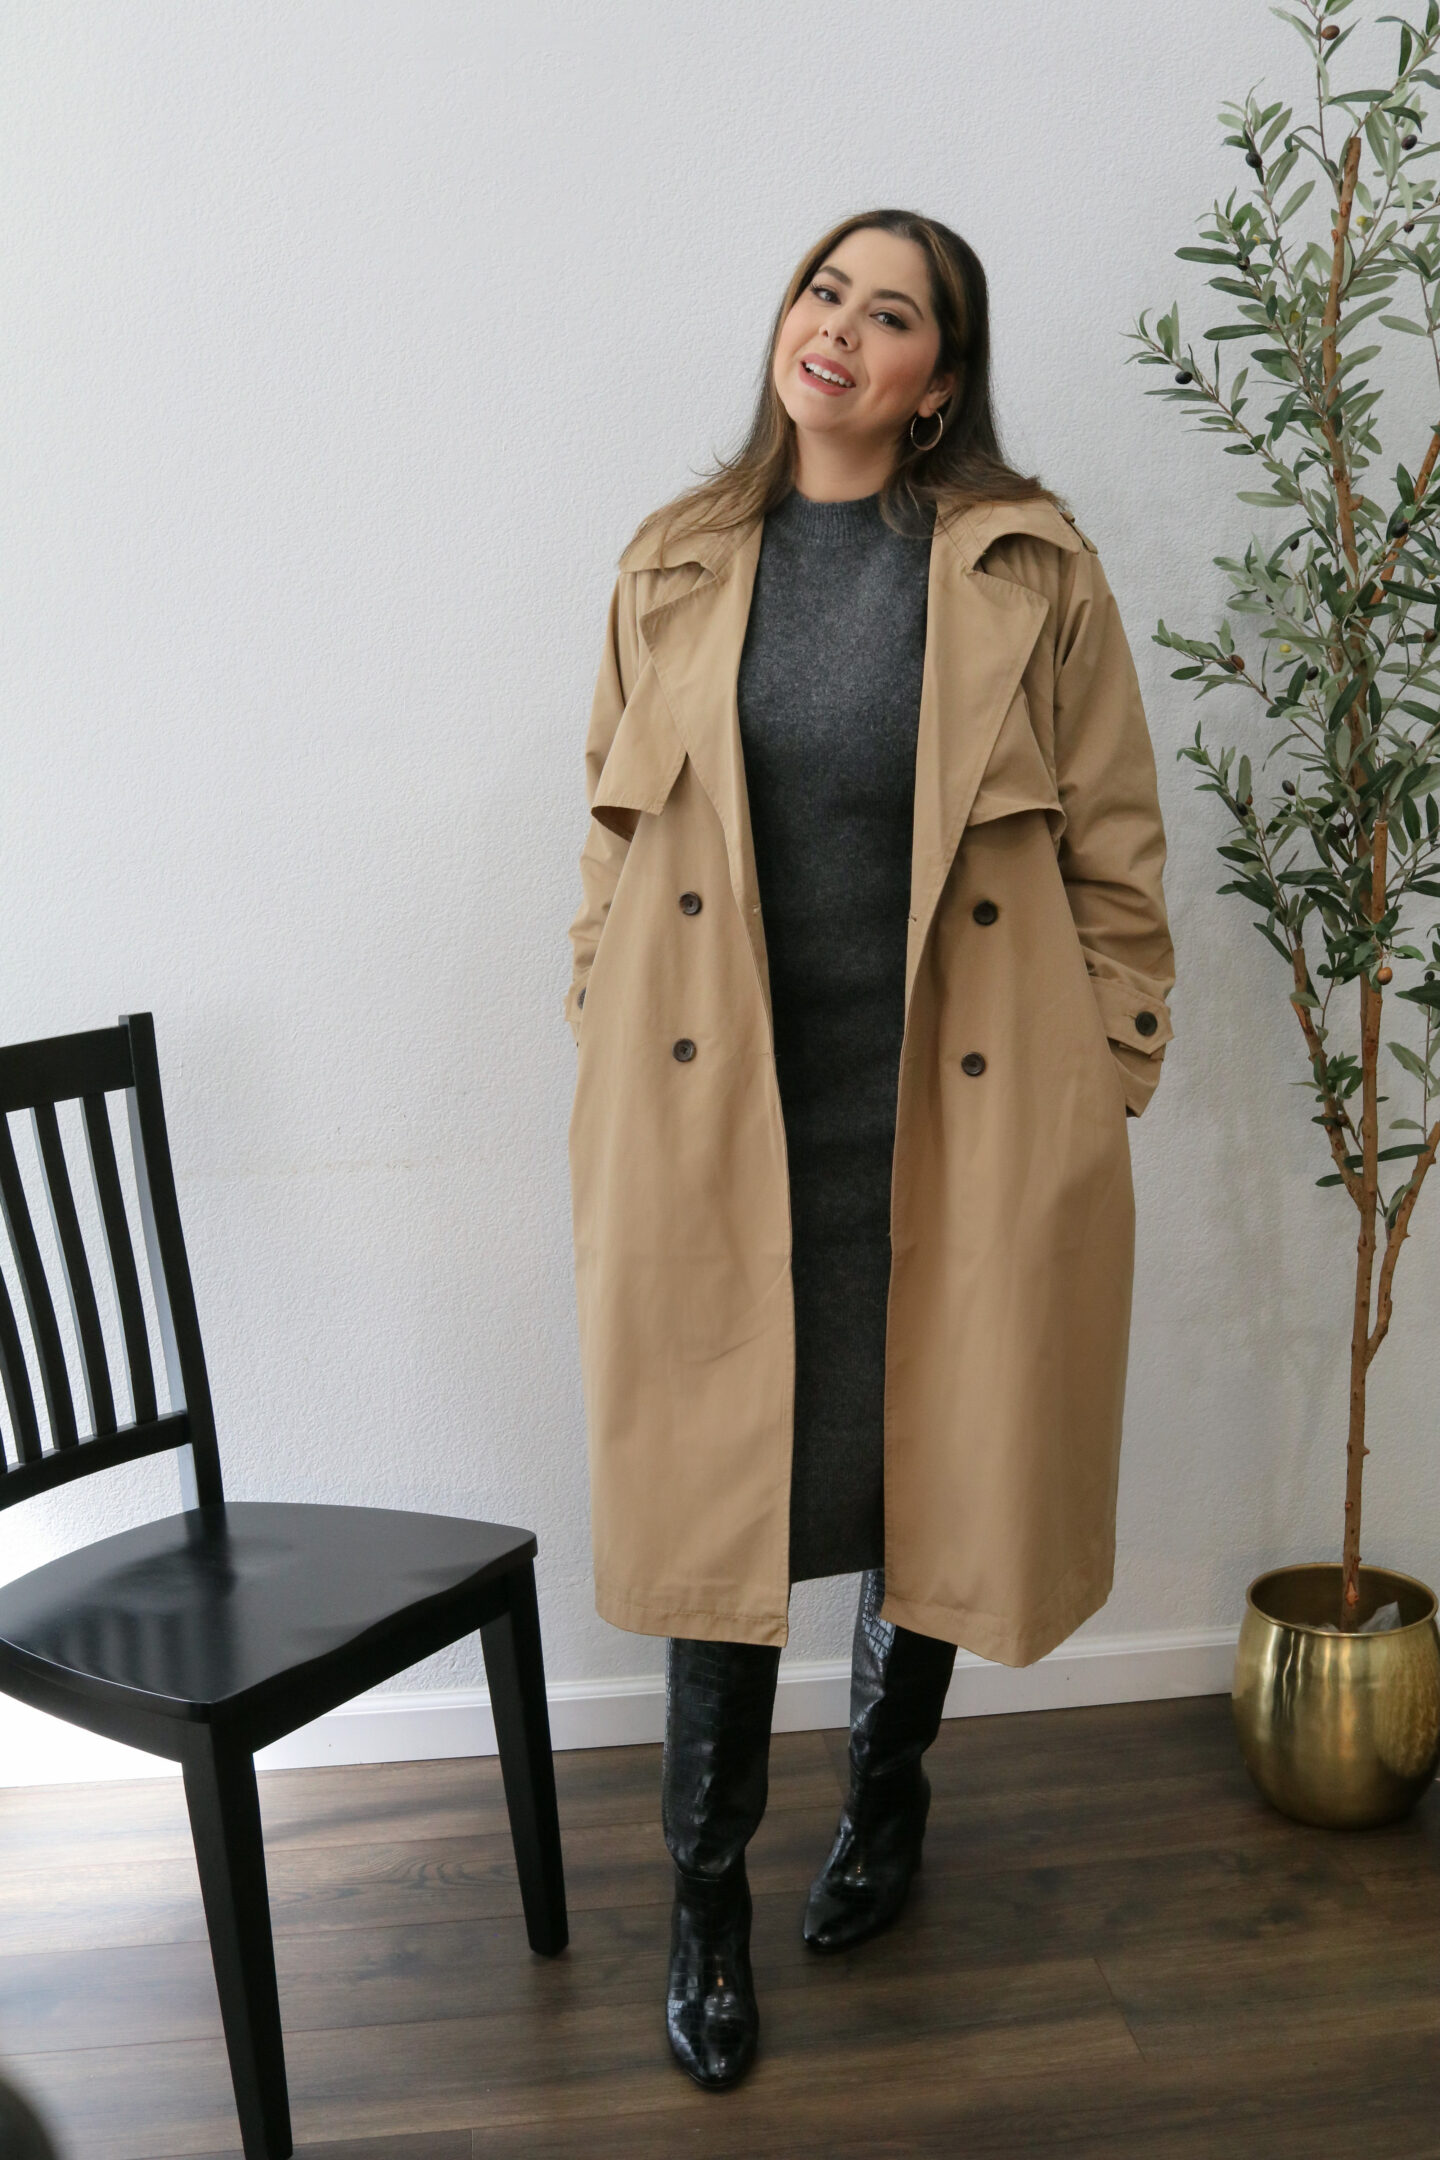 croc embossed boots with midi sweater dress, how to style a trench coat with a dress, chic trench coat outfit for women over 35